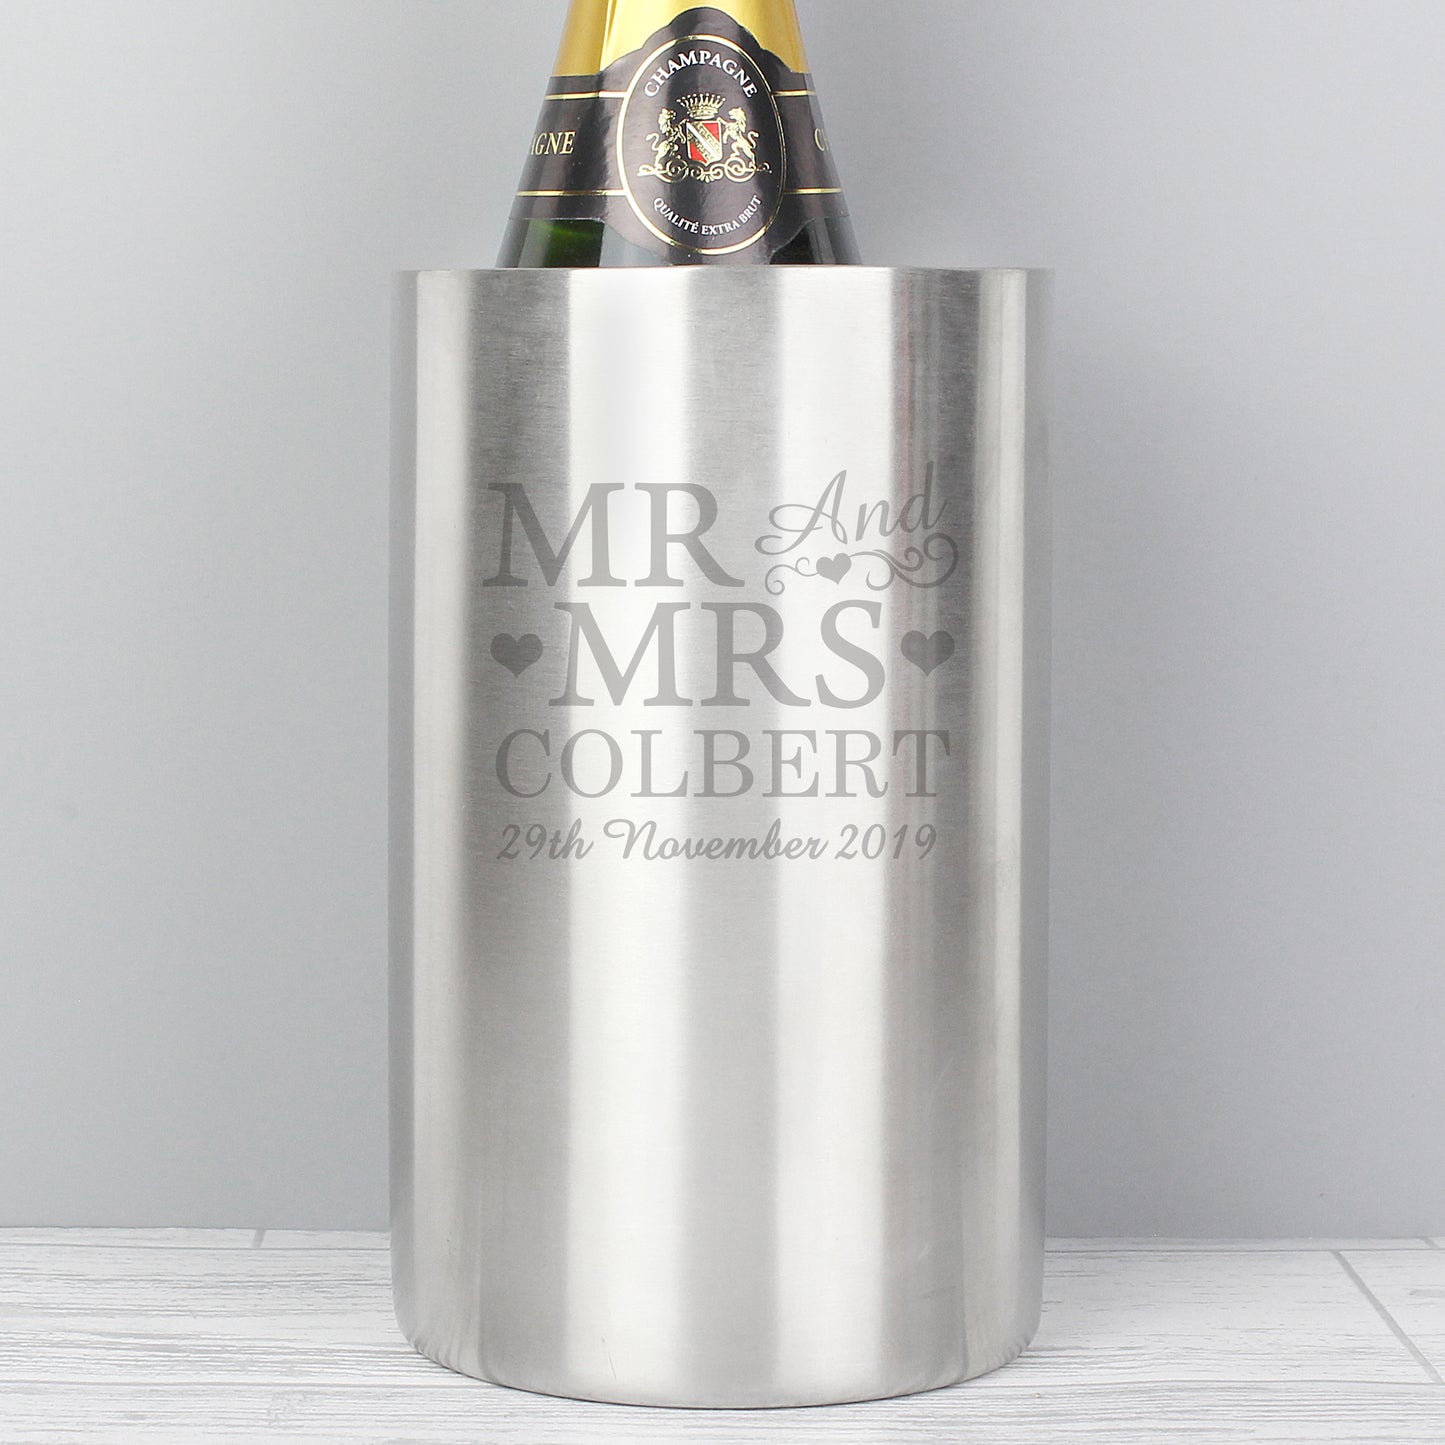 Personalised Mr & Mrs Wine Cooler - Personalise It!